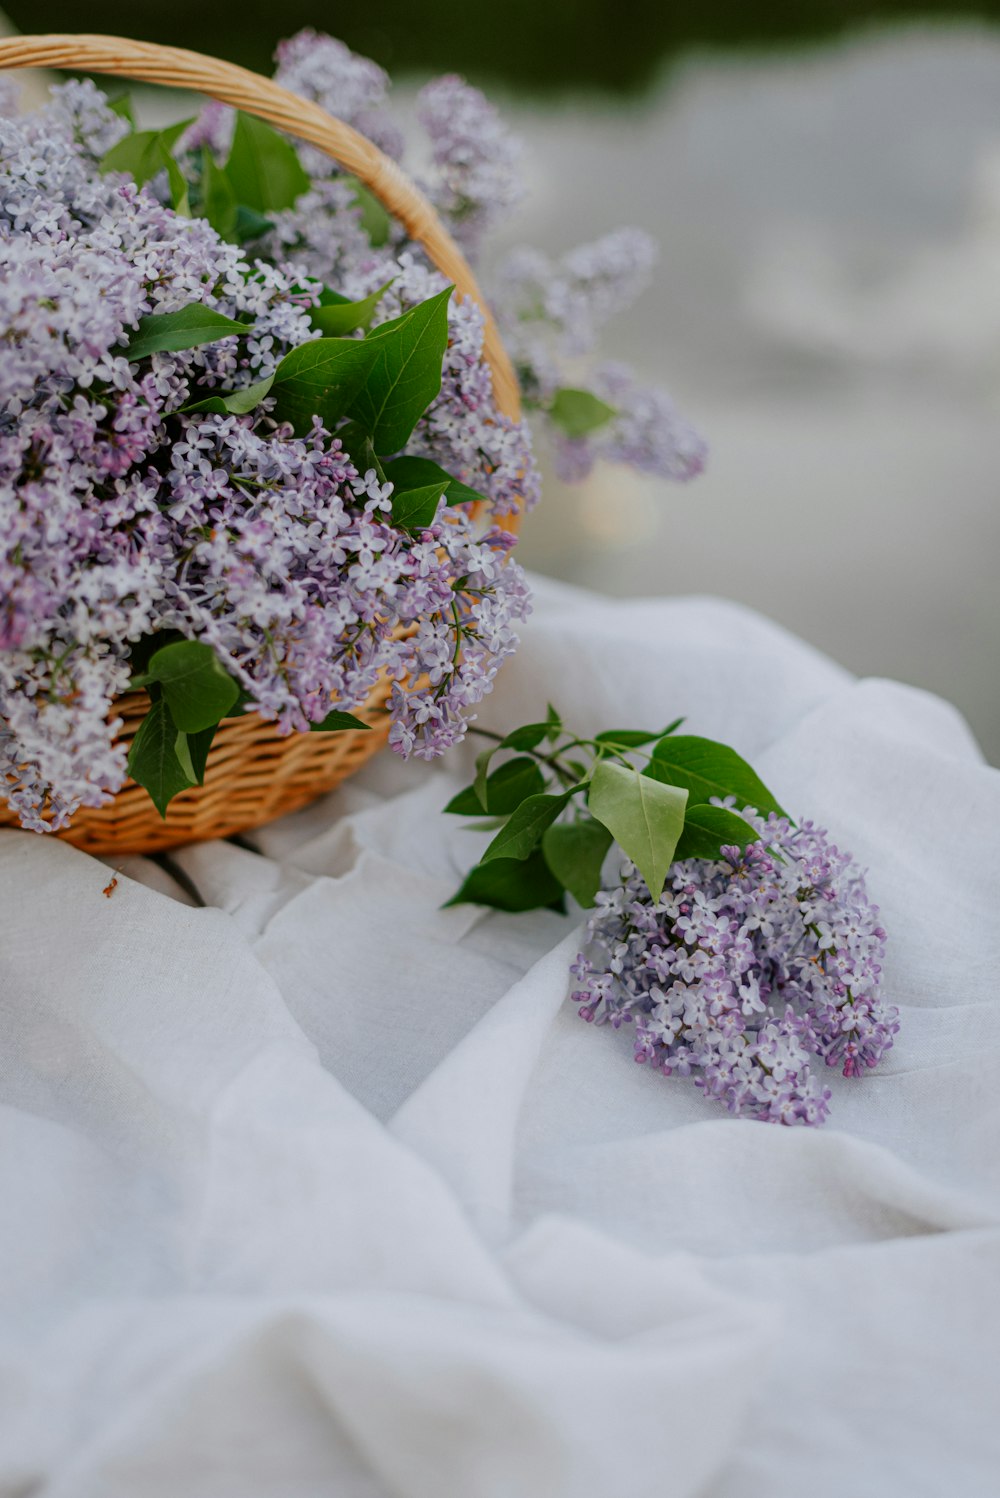 a wicker basket filled with lilacs on a white cloth